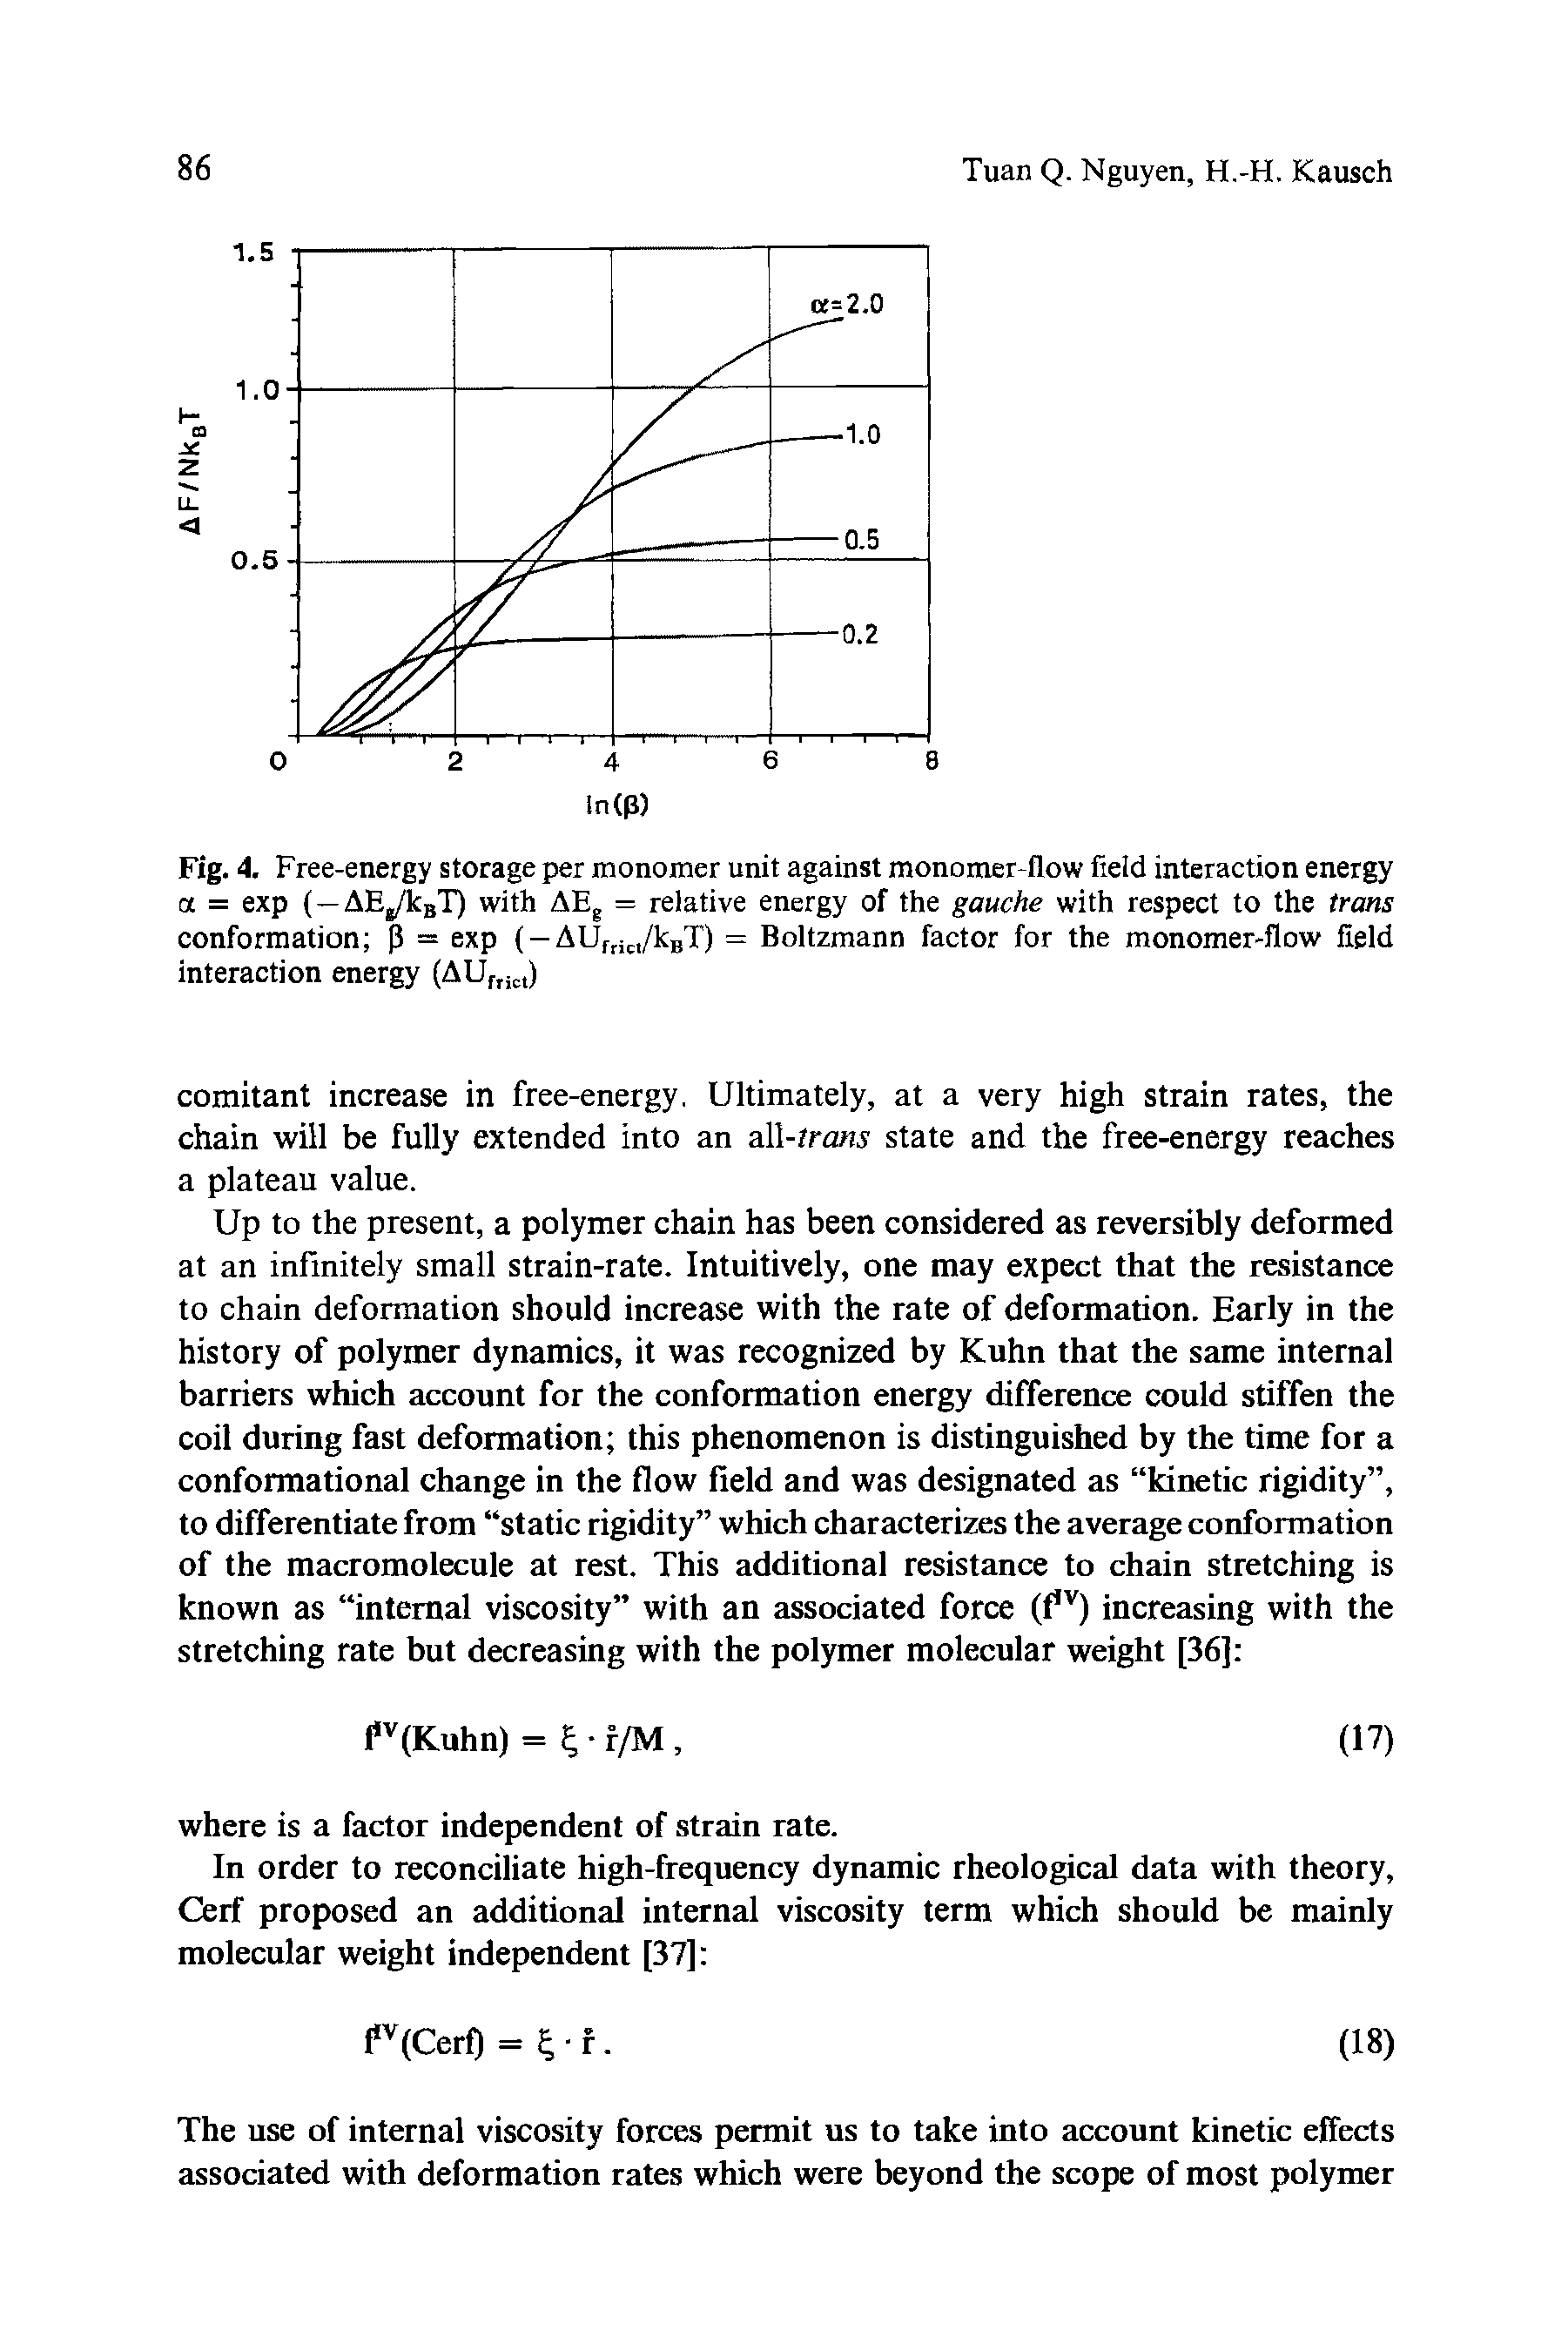 Fig. 4. Free-energy storage per monomer unit against monomer-flow field interaction energy a = exp (—AEg/kuT) with AEg = relative energy of the gauche with respect to the trans conformation P = exp (- AUfri( 1/kBT) = Boltzmann factor for the monomer-flow field interaction energy (AUfrii.t)...